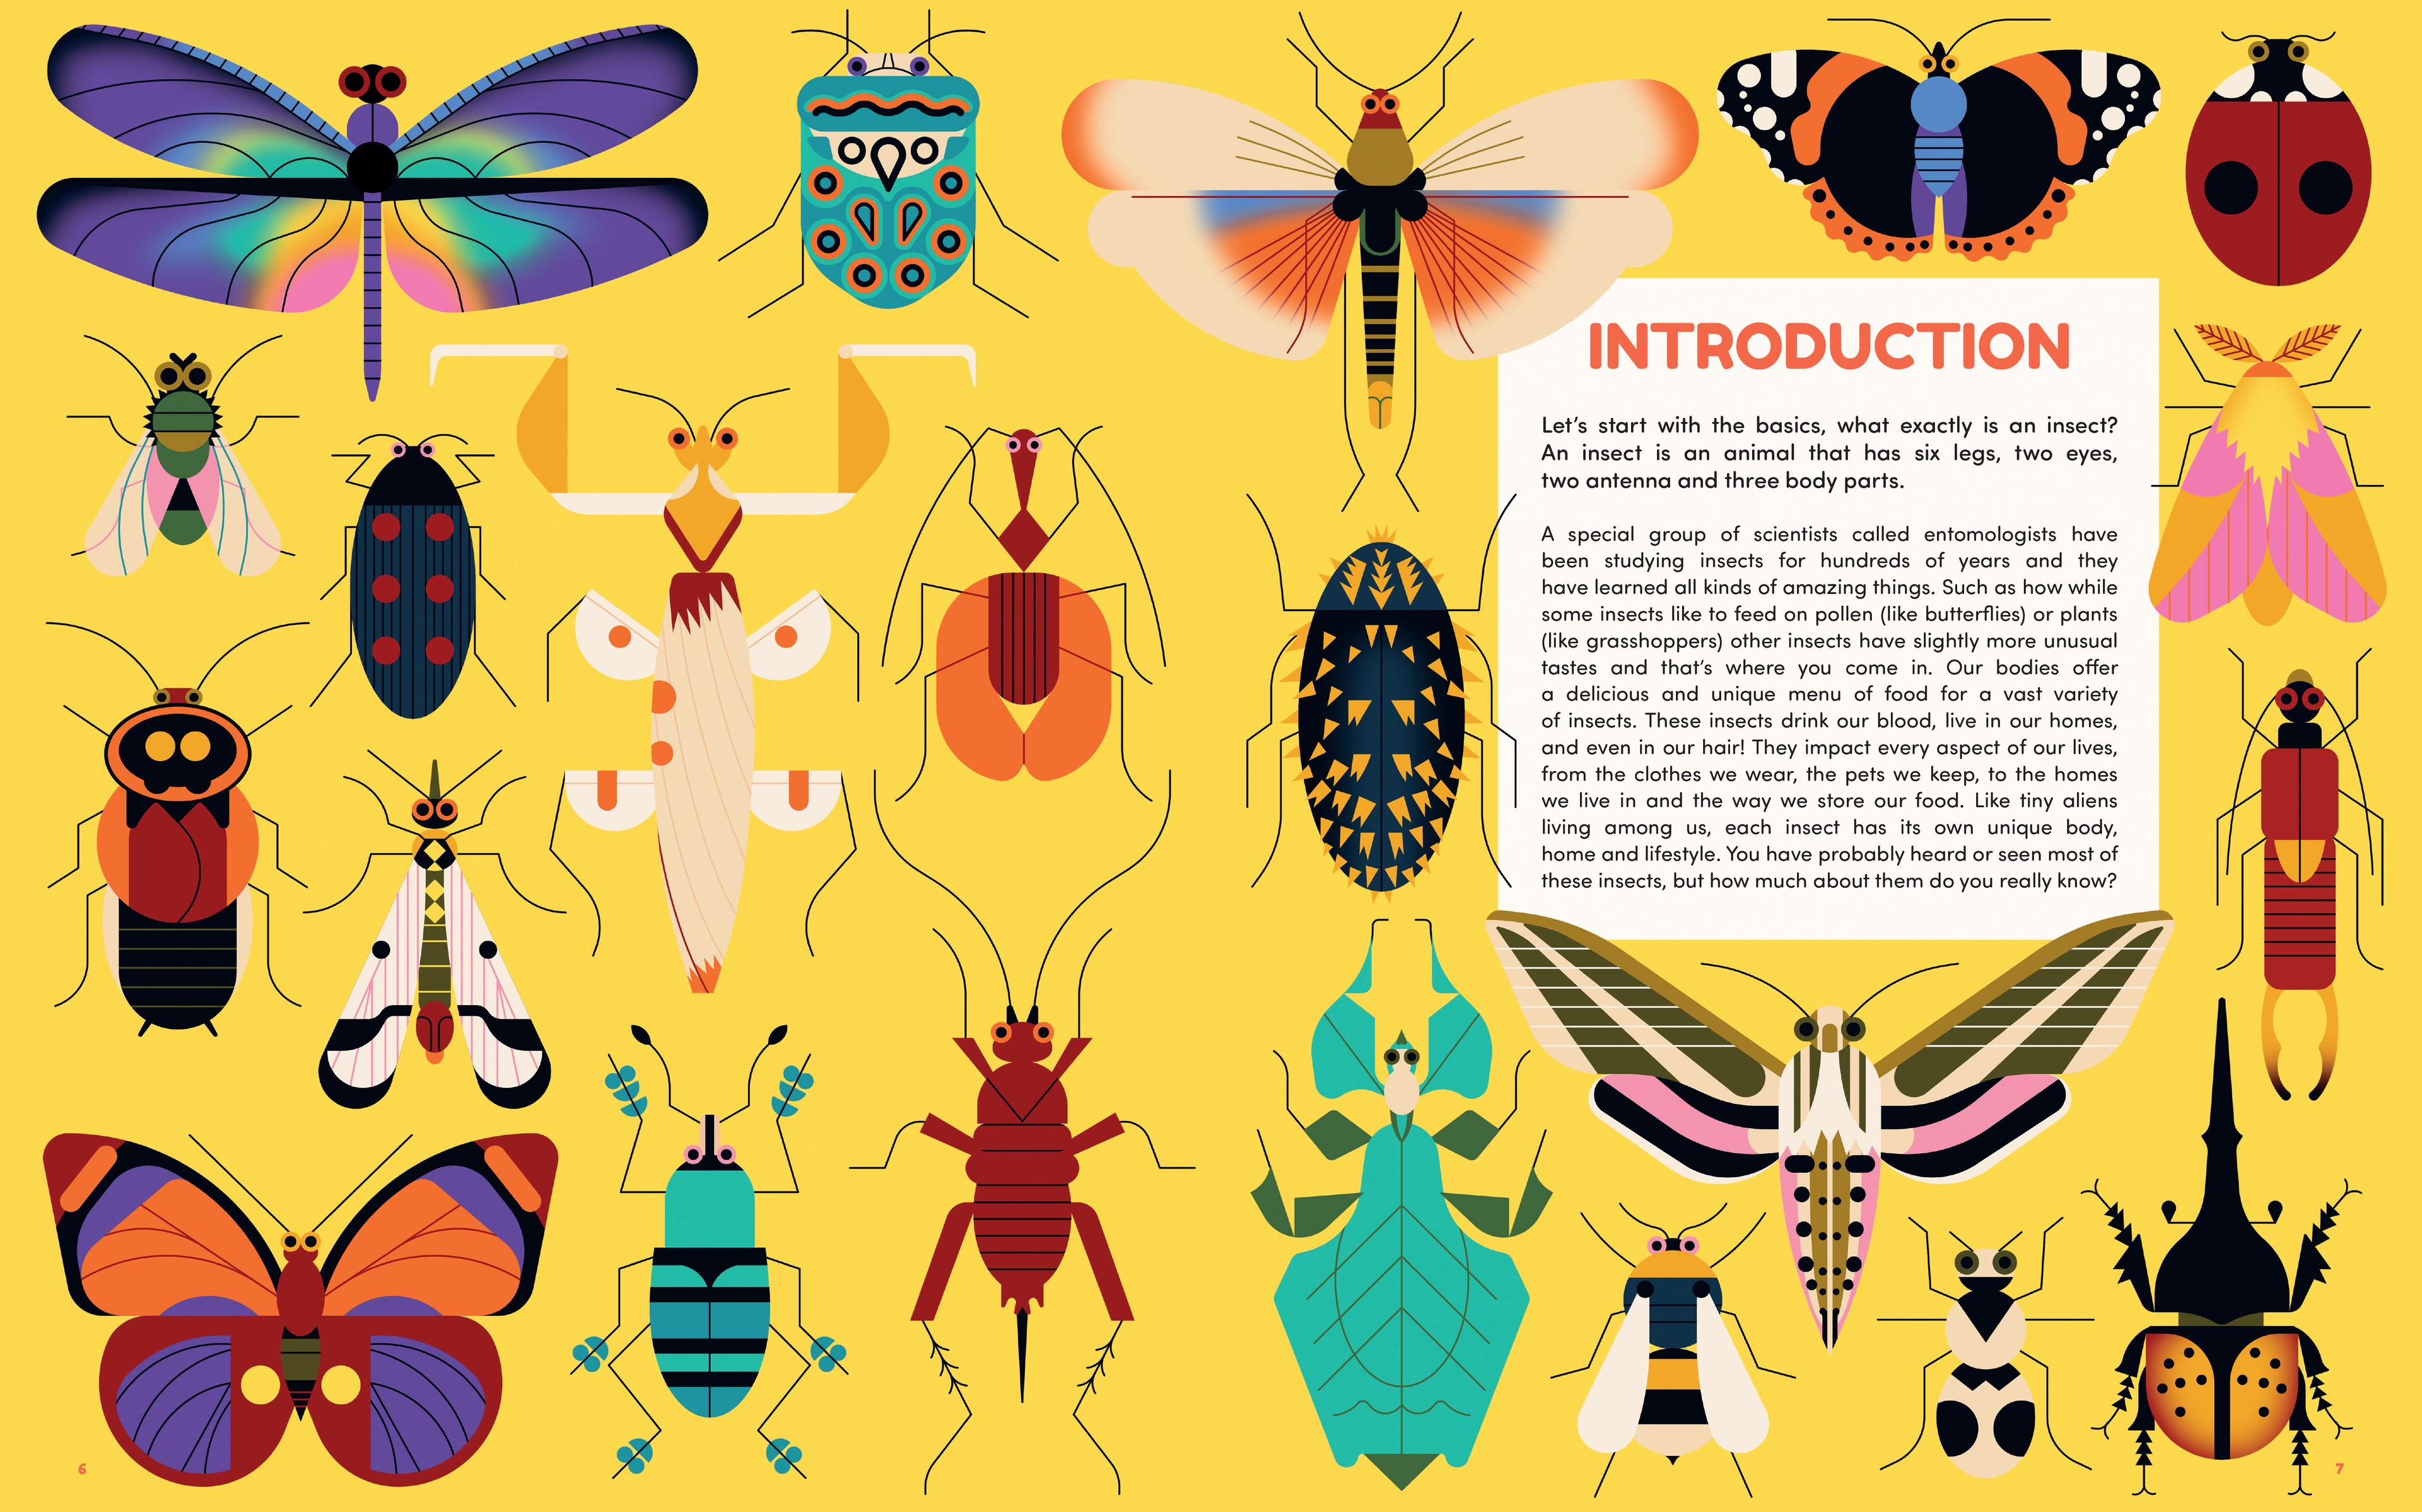 Vibrant illustrations of a variety of insects against a bright yellow backdrop 